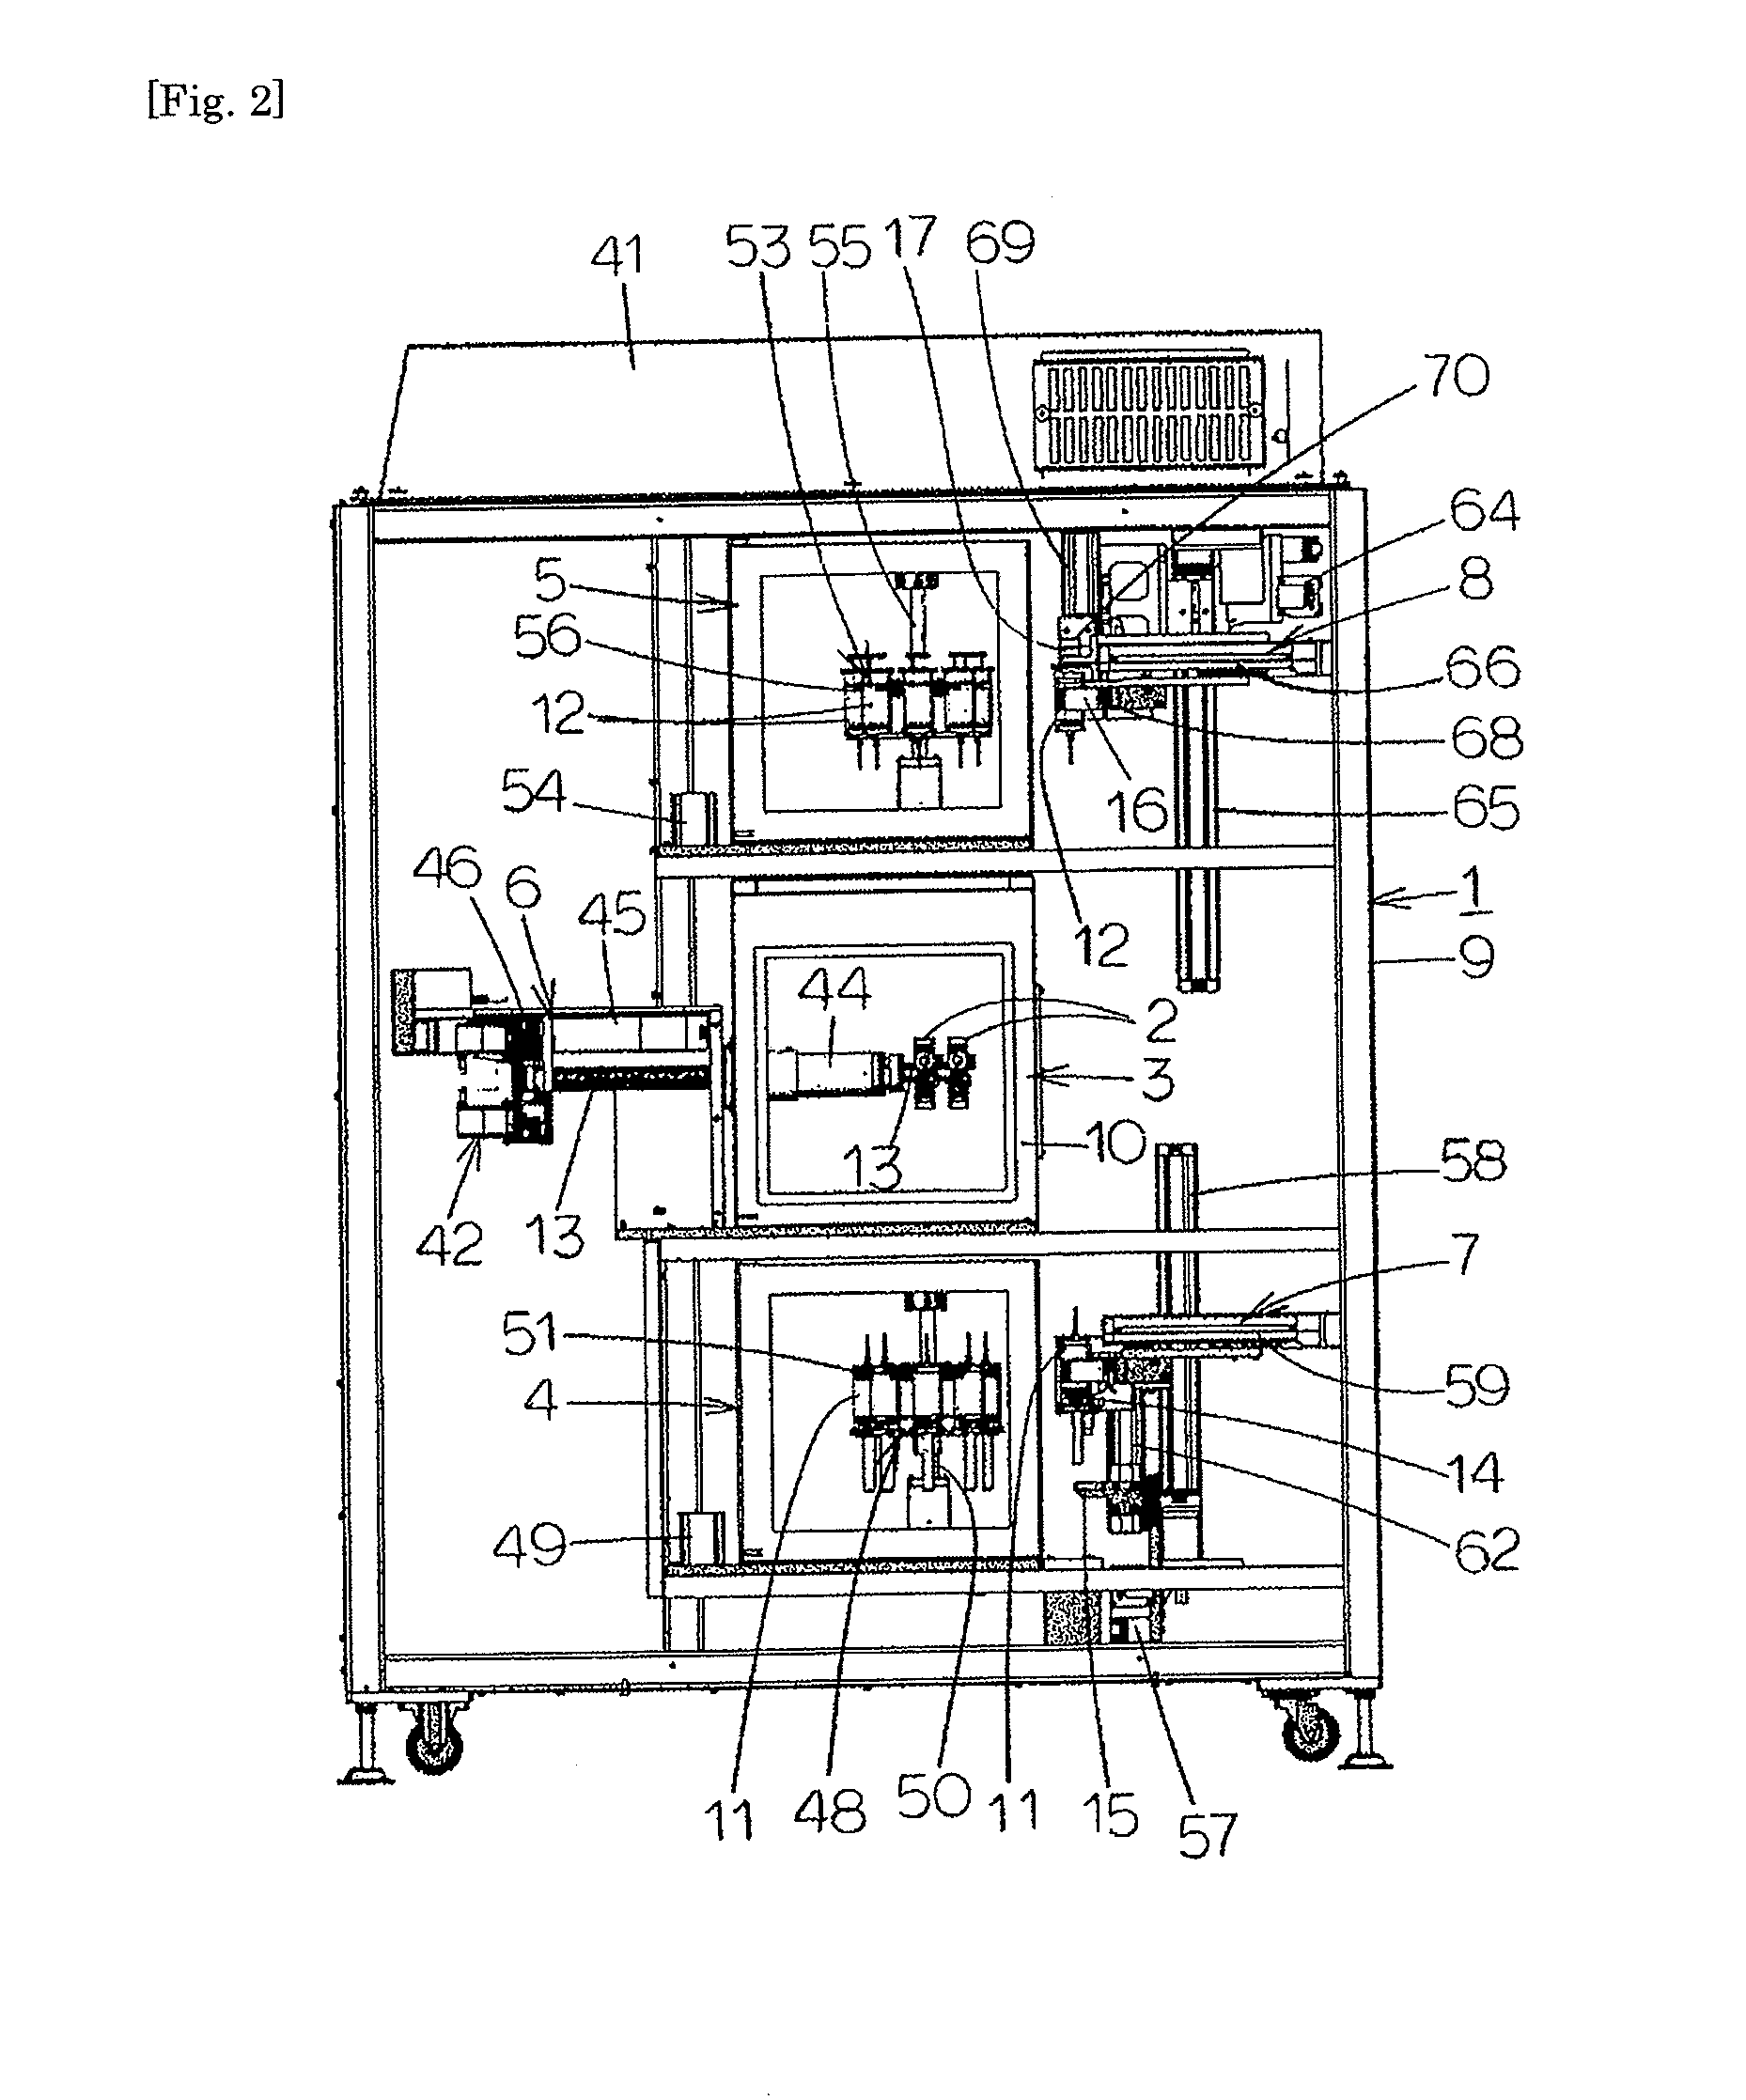 Rotating culture vessel and automatic cell culture apparatus using same